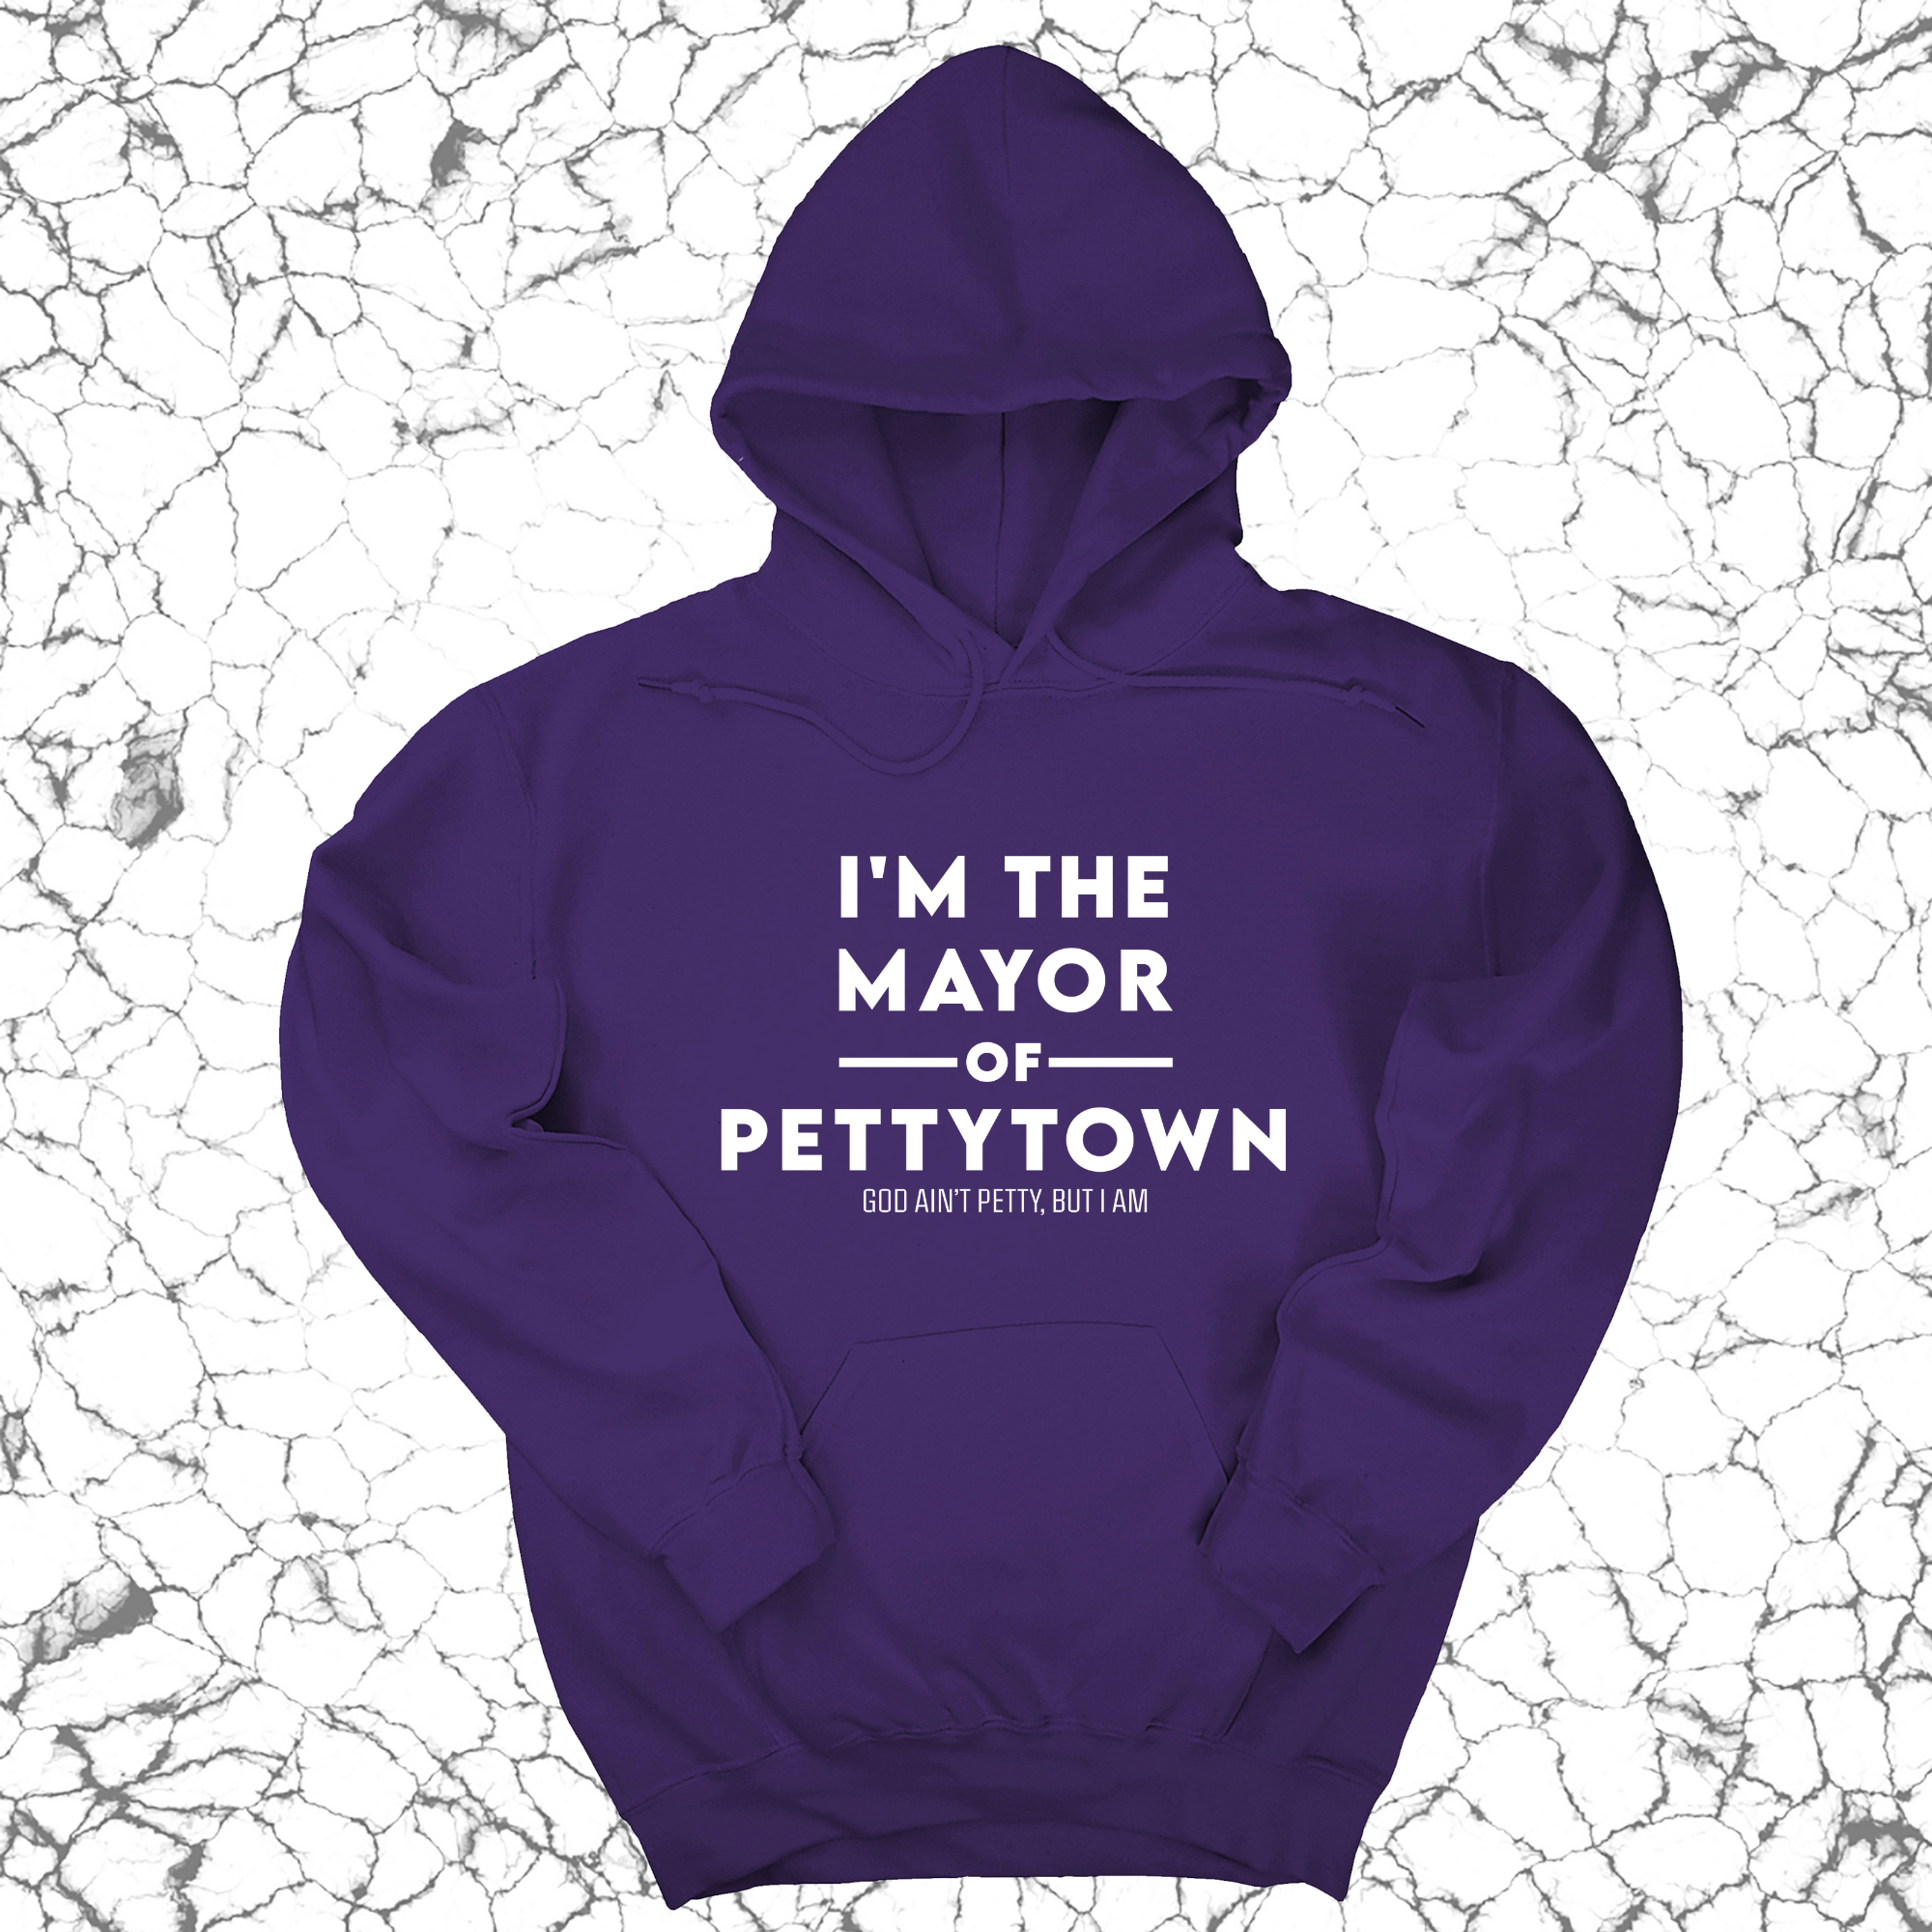 I'm the Mayor of Pettytown Unisex Hoodie-Hoodie-The Original God Ain't Petty But I Am